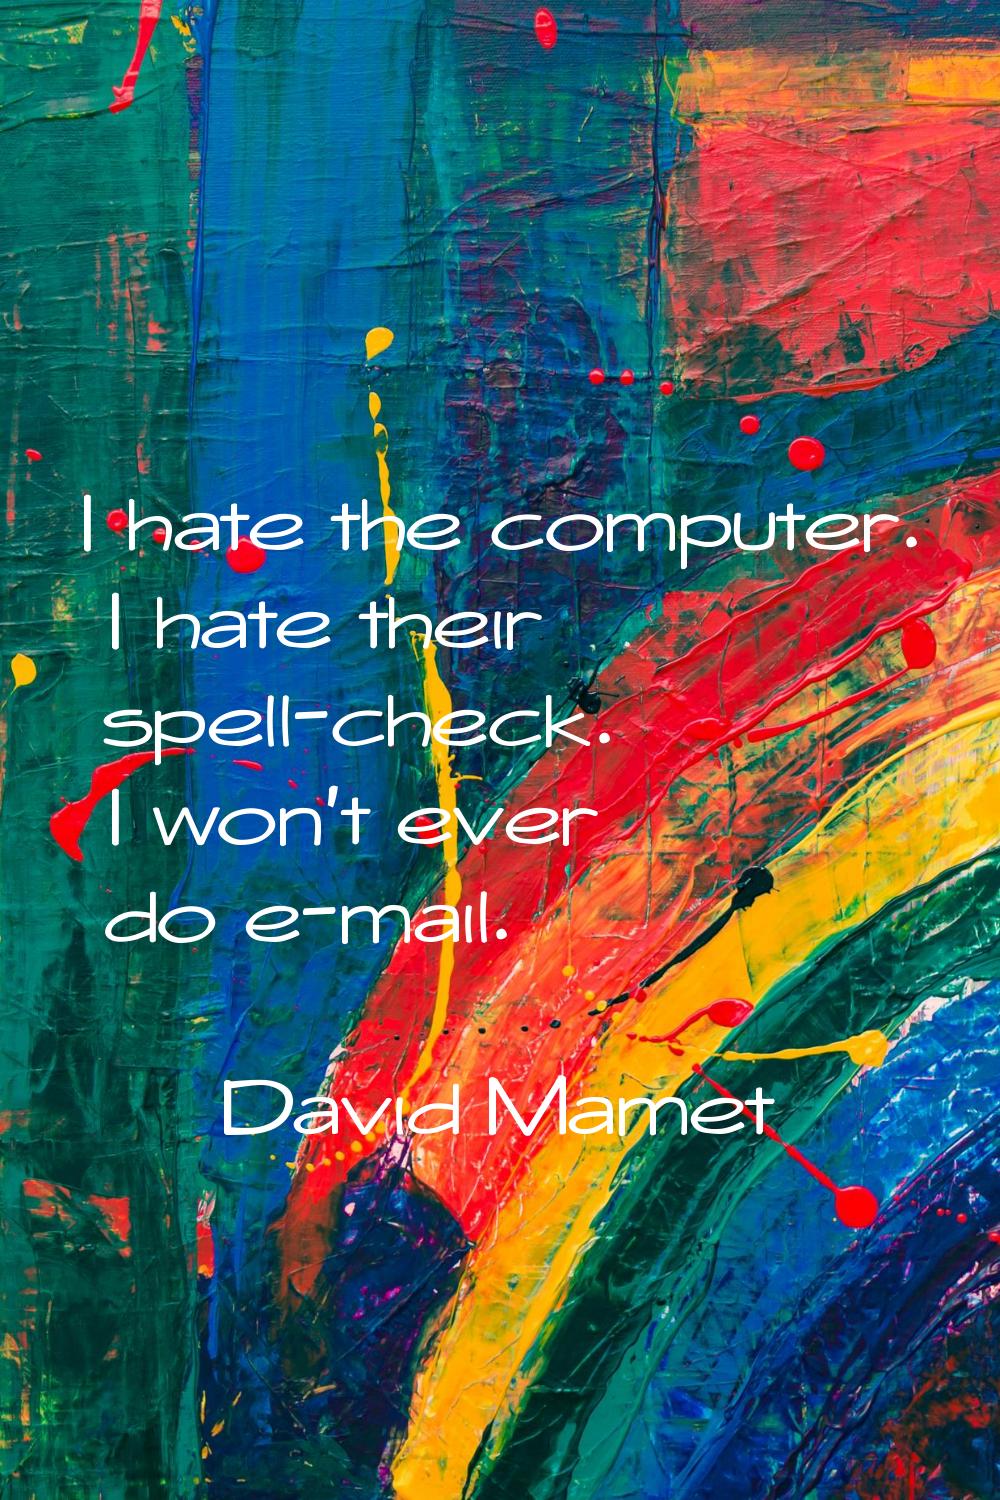 I hate the computer. I hate their spell-check. I won't ever do e-mail.